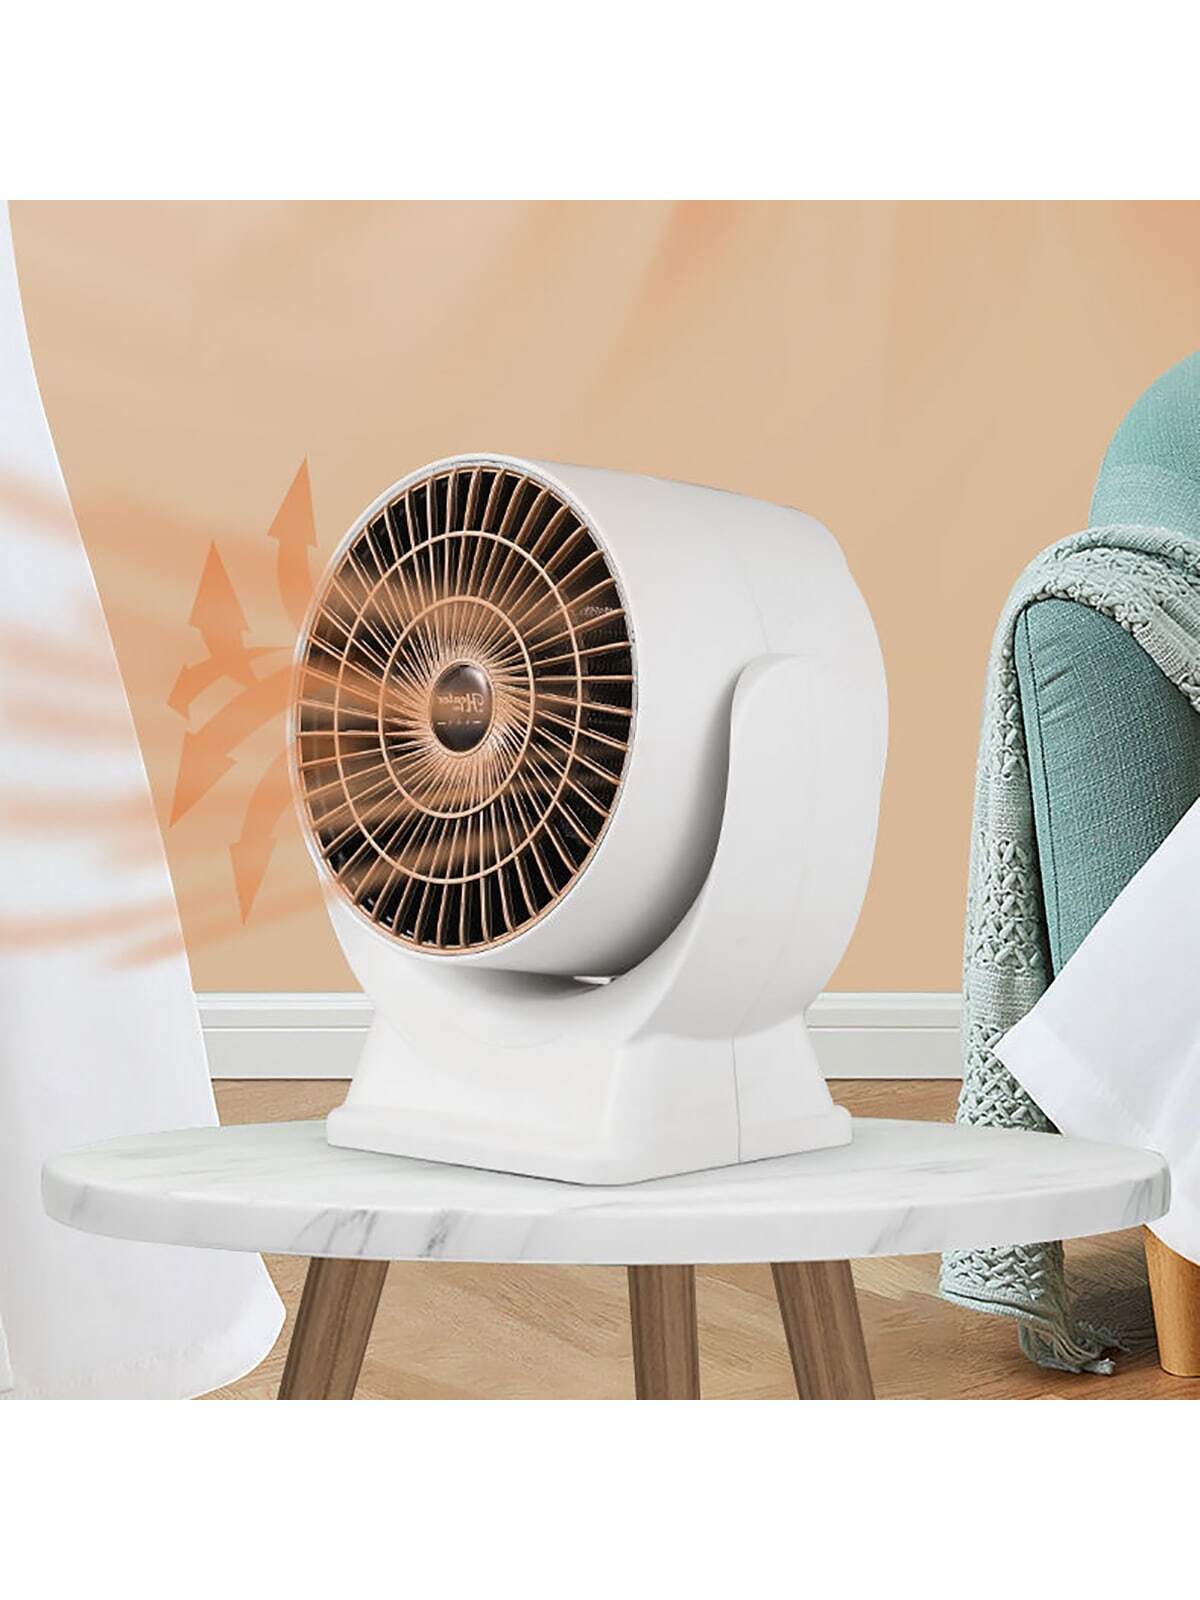 Mini heater,personal heater fan,Fast Heating Ceramic Room Small Heater with Heating and Fan Modes for Bedroom, Office and Indoor Use-White-1